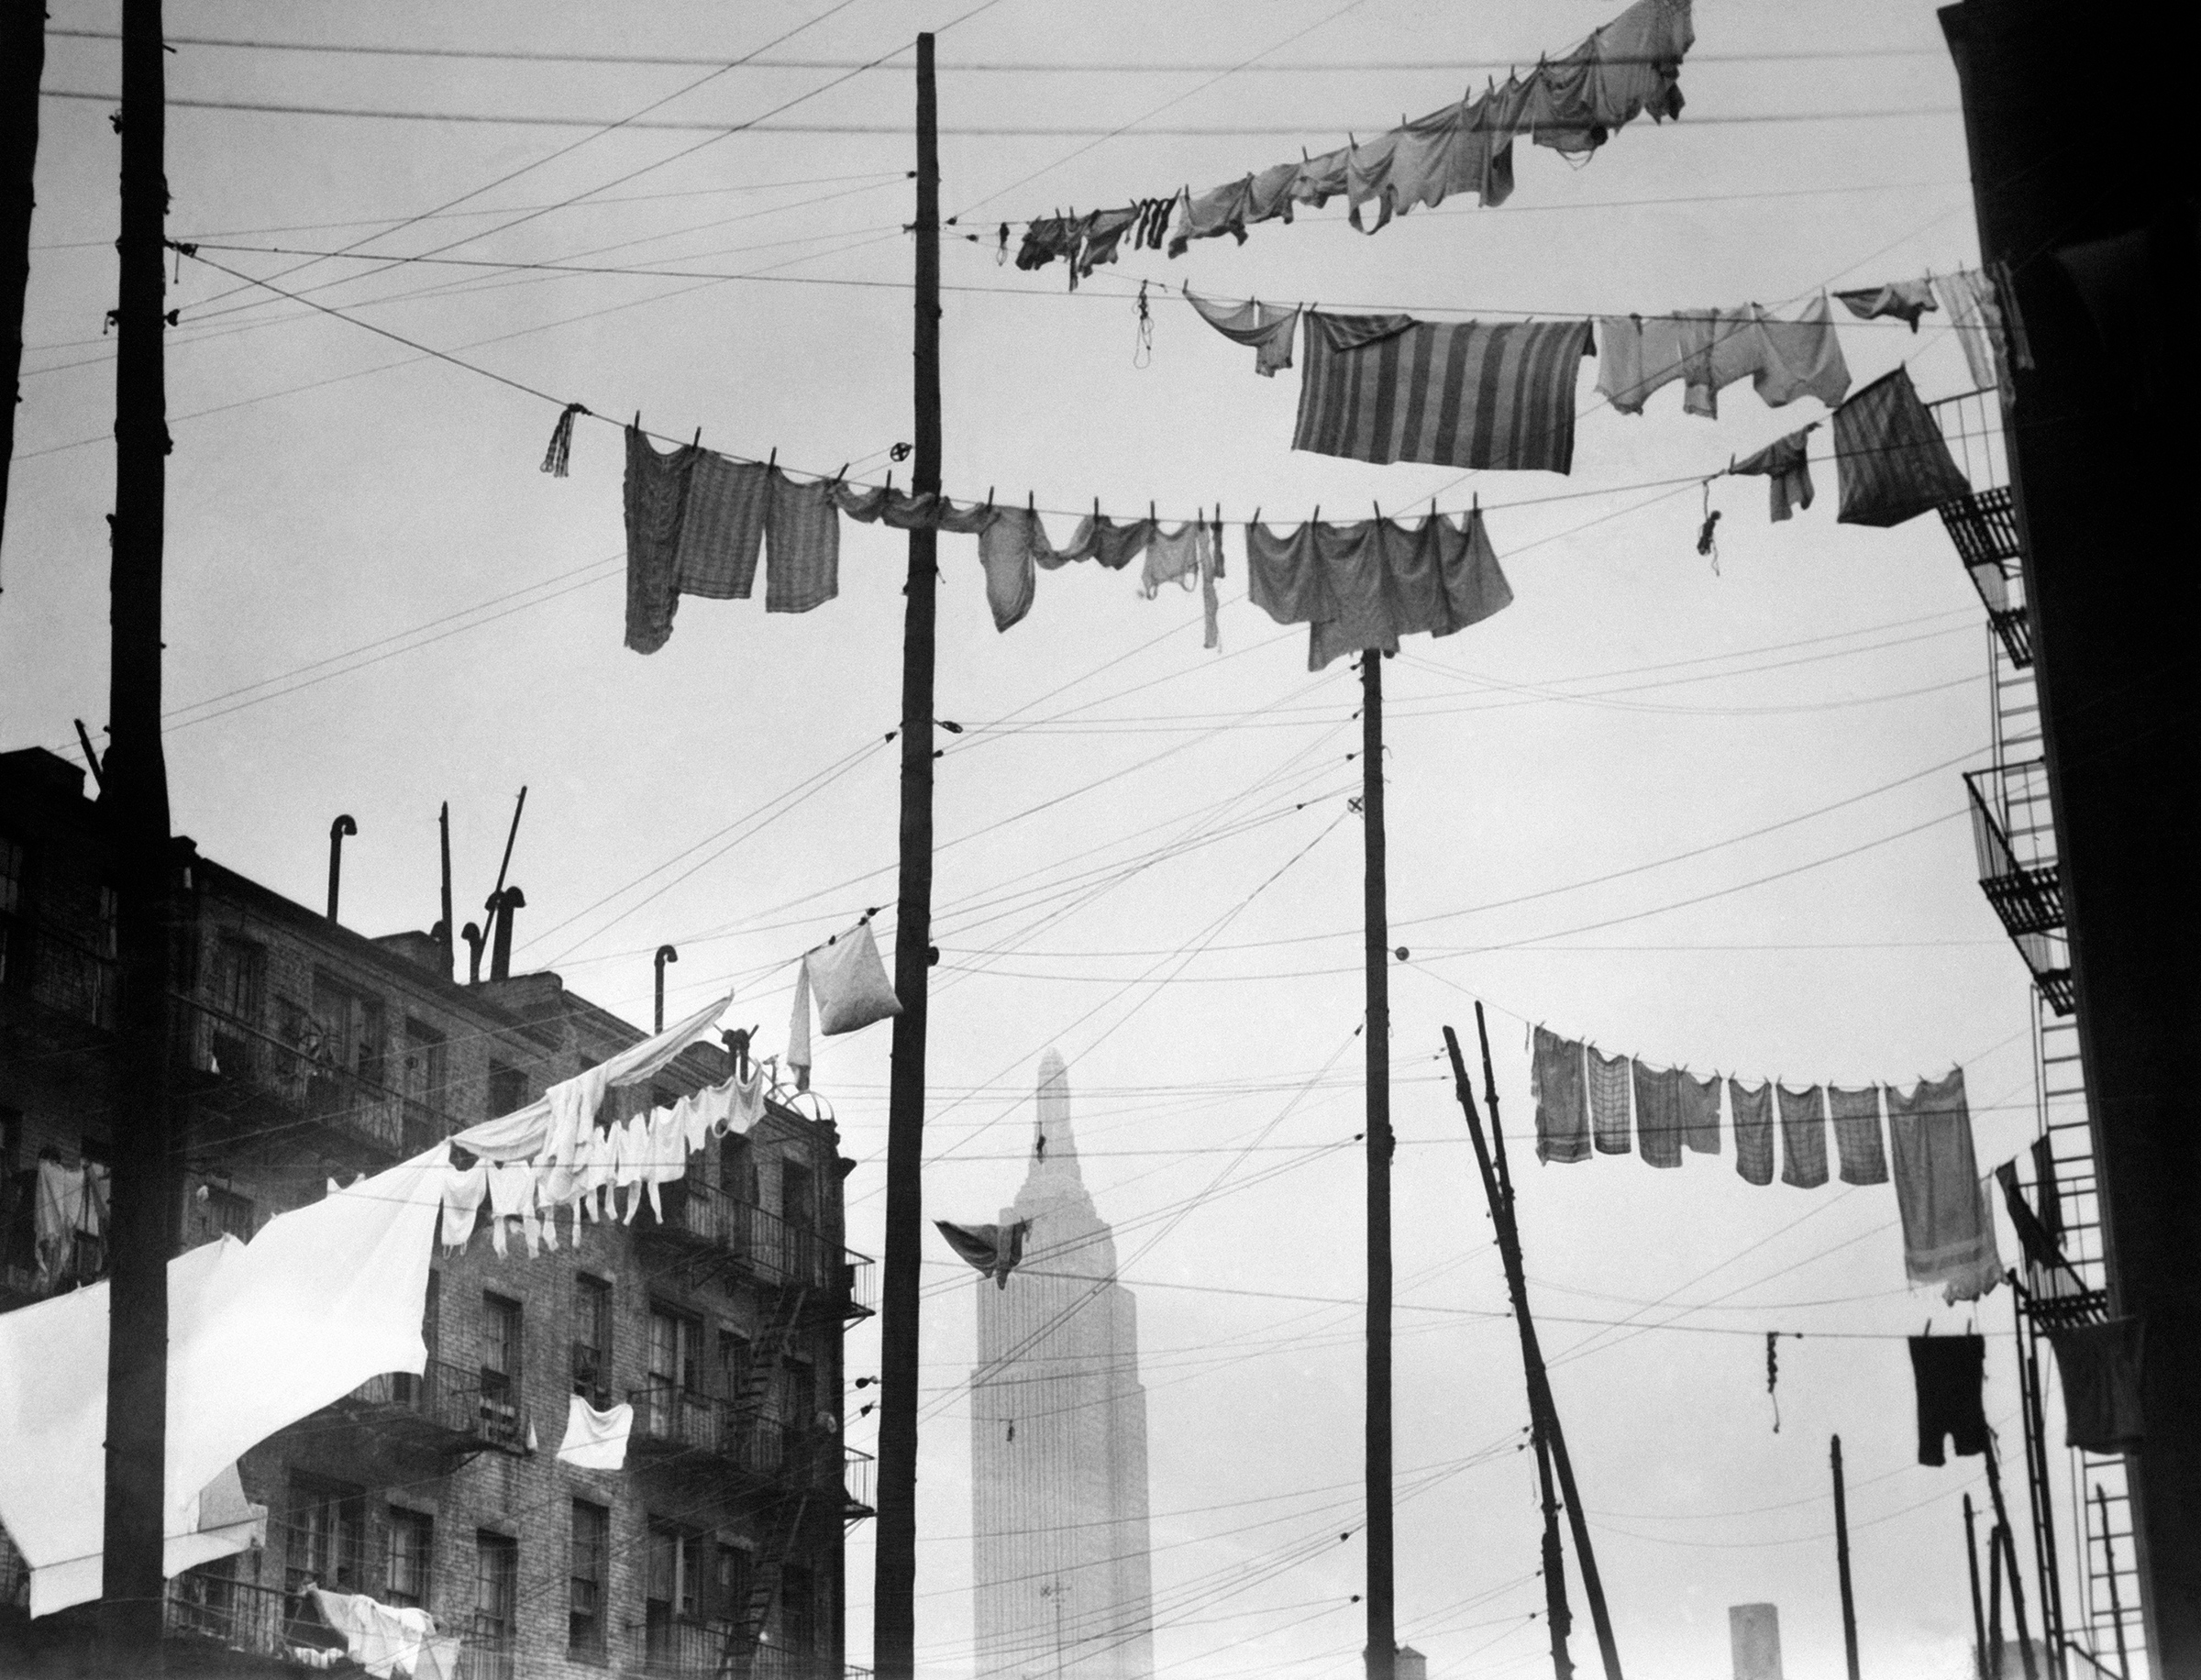 A view of the Empire State Building through clothes lines in New York City, Aug. 28, 1931. (Keystone-France/Gamma-Rapho/Getty Images)